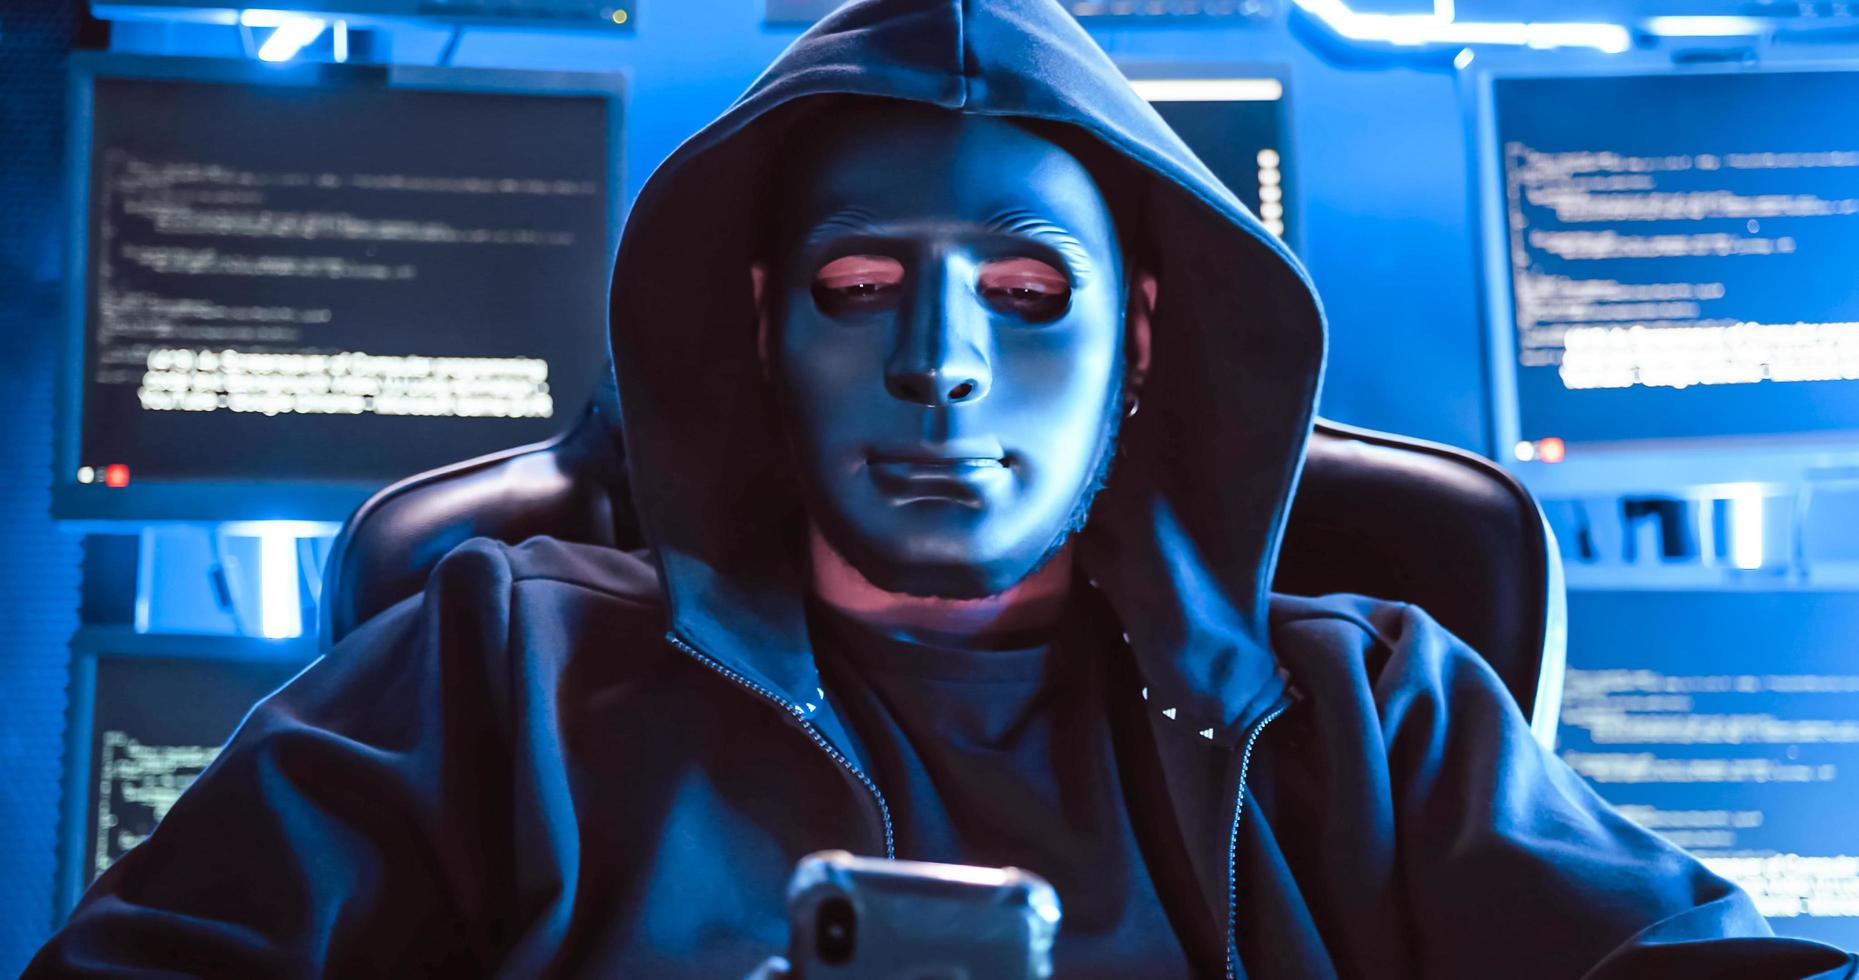 A hacker wearing a mask to cover his face is using computer to hack data to get ransom from victims. photo